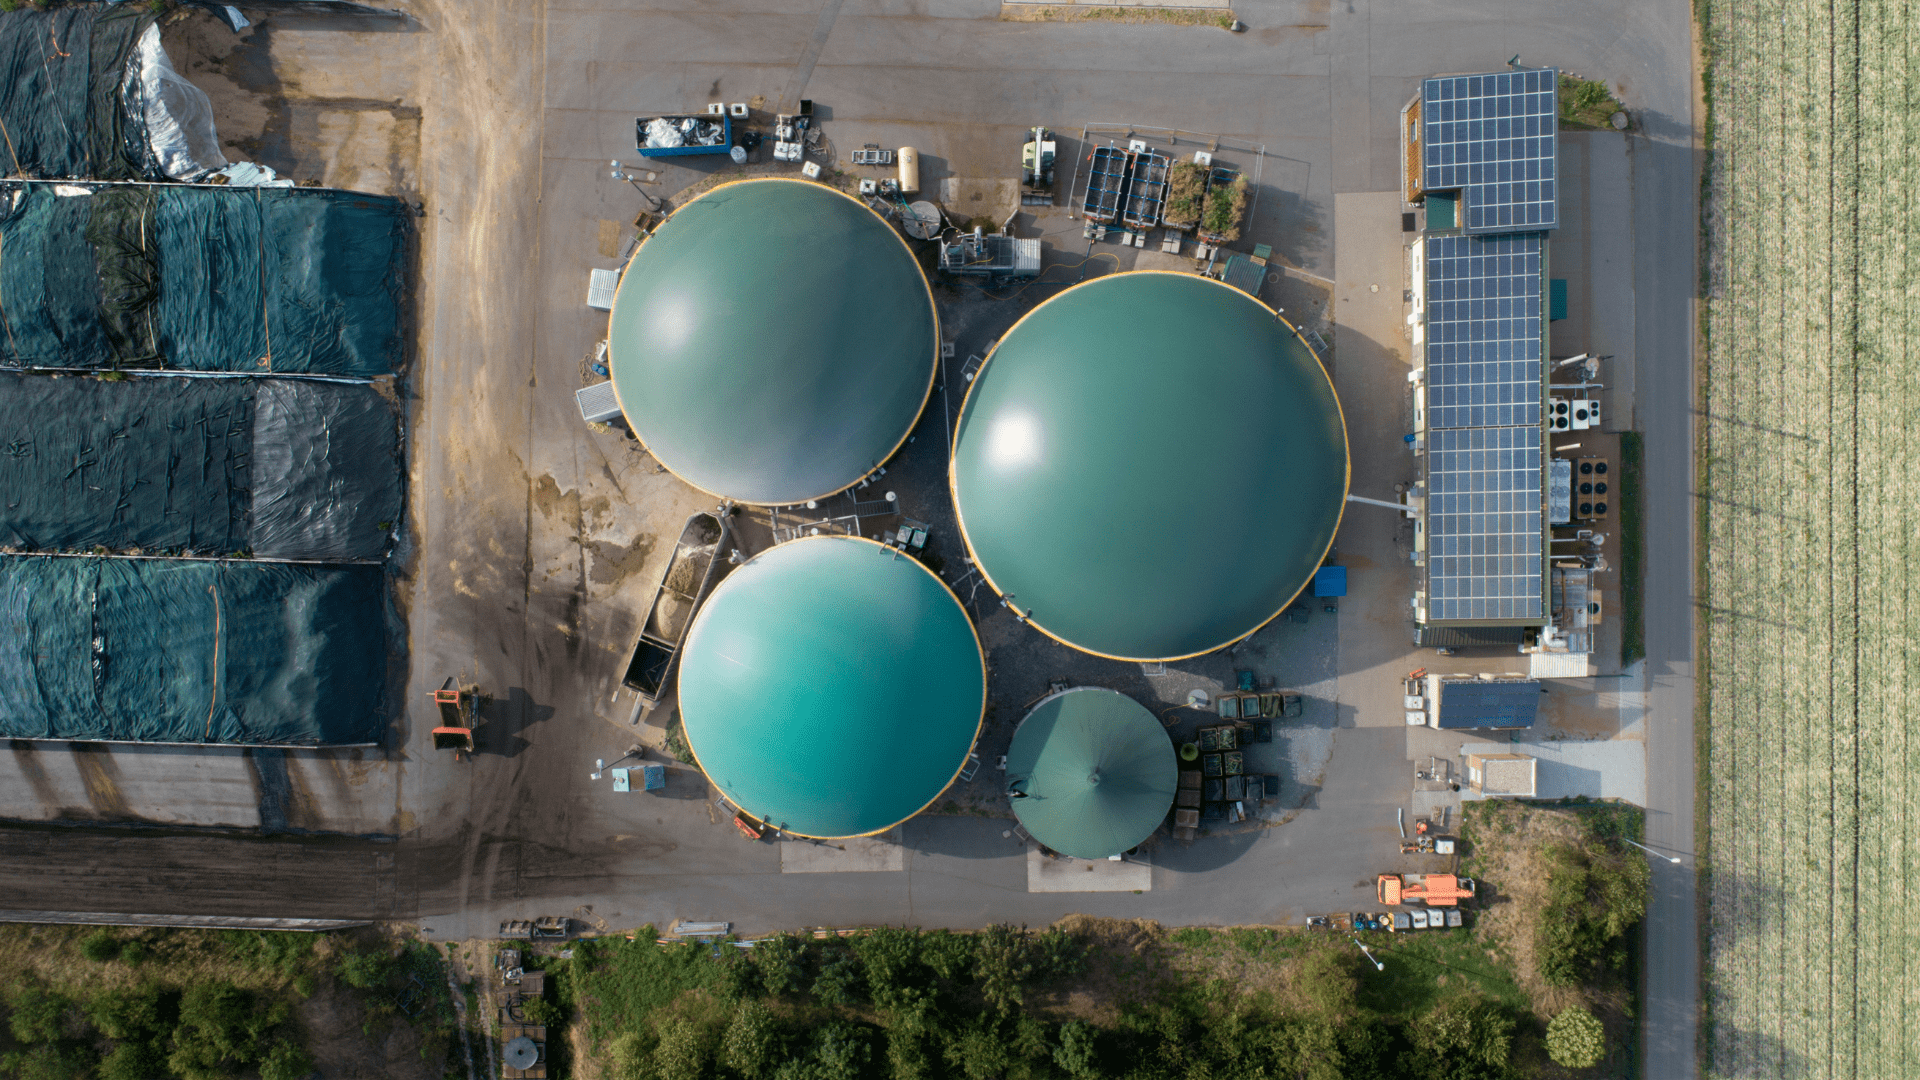 Featured image for “Sussex biogas facility expansion subject of upcoming workshop”